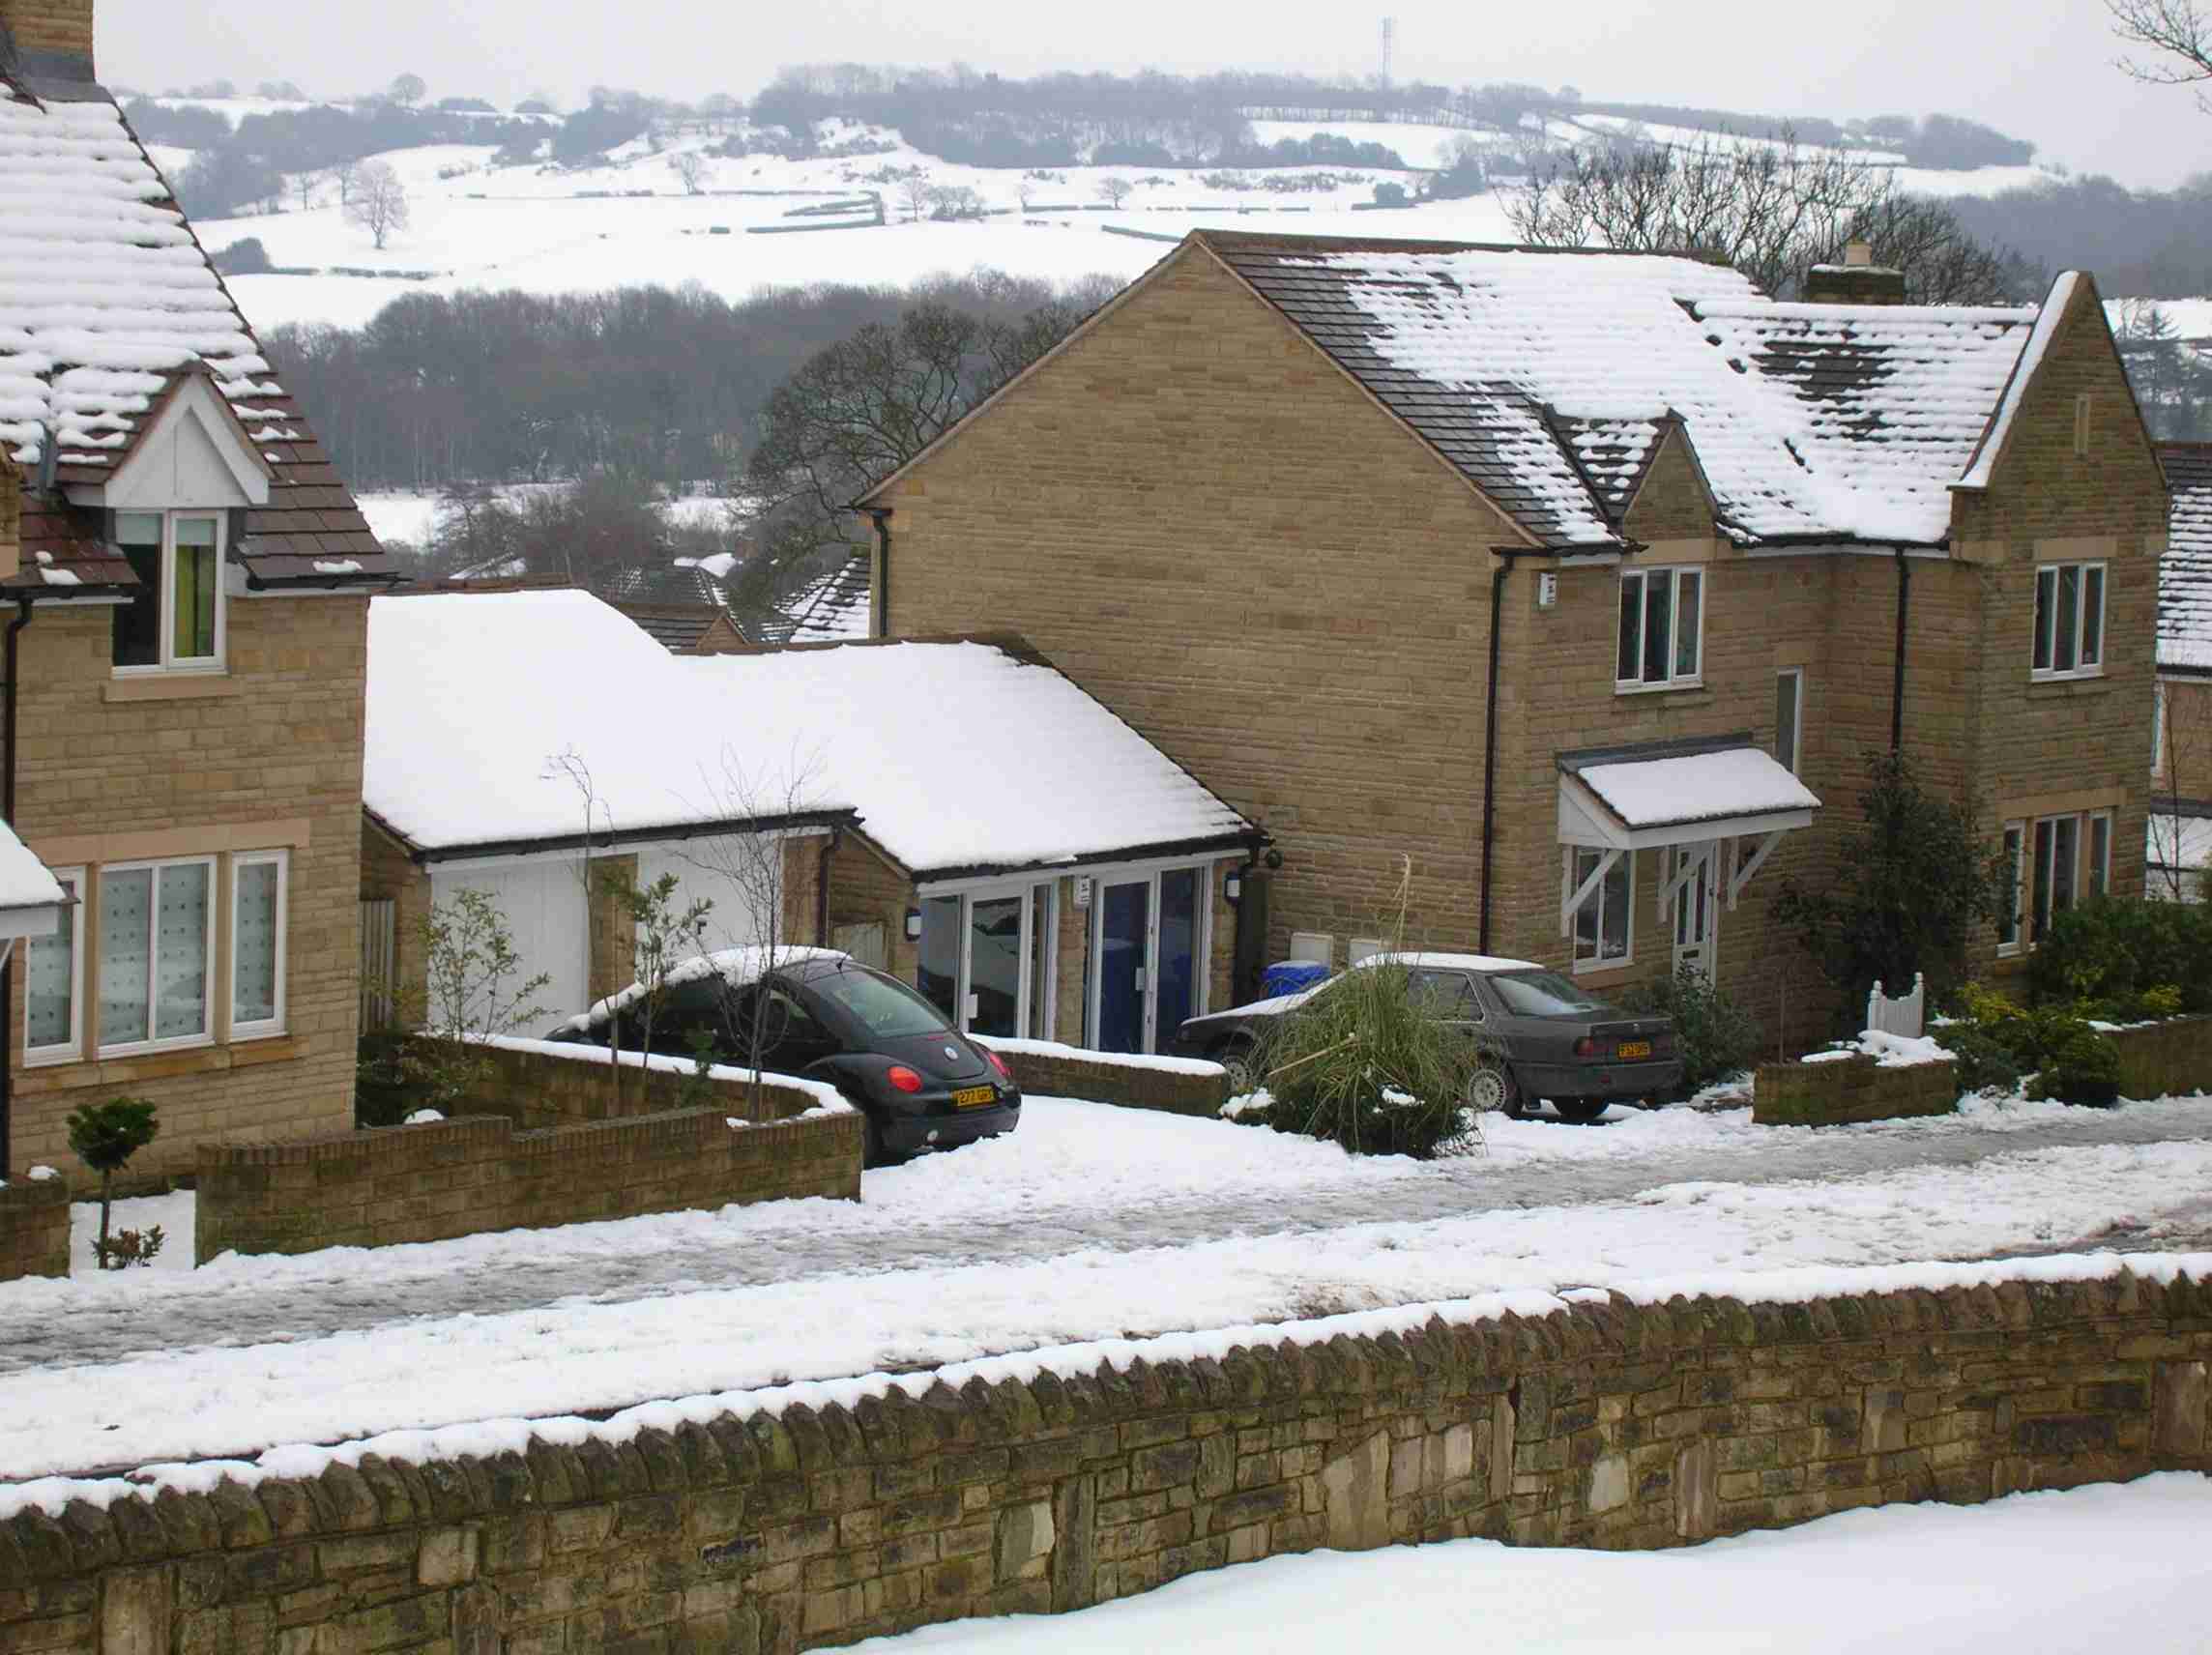 Looking from the garden of TOTLEY HALL down TOTLEY HALL LANE